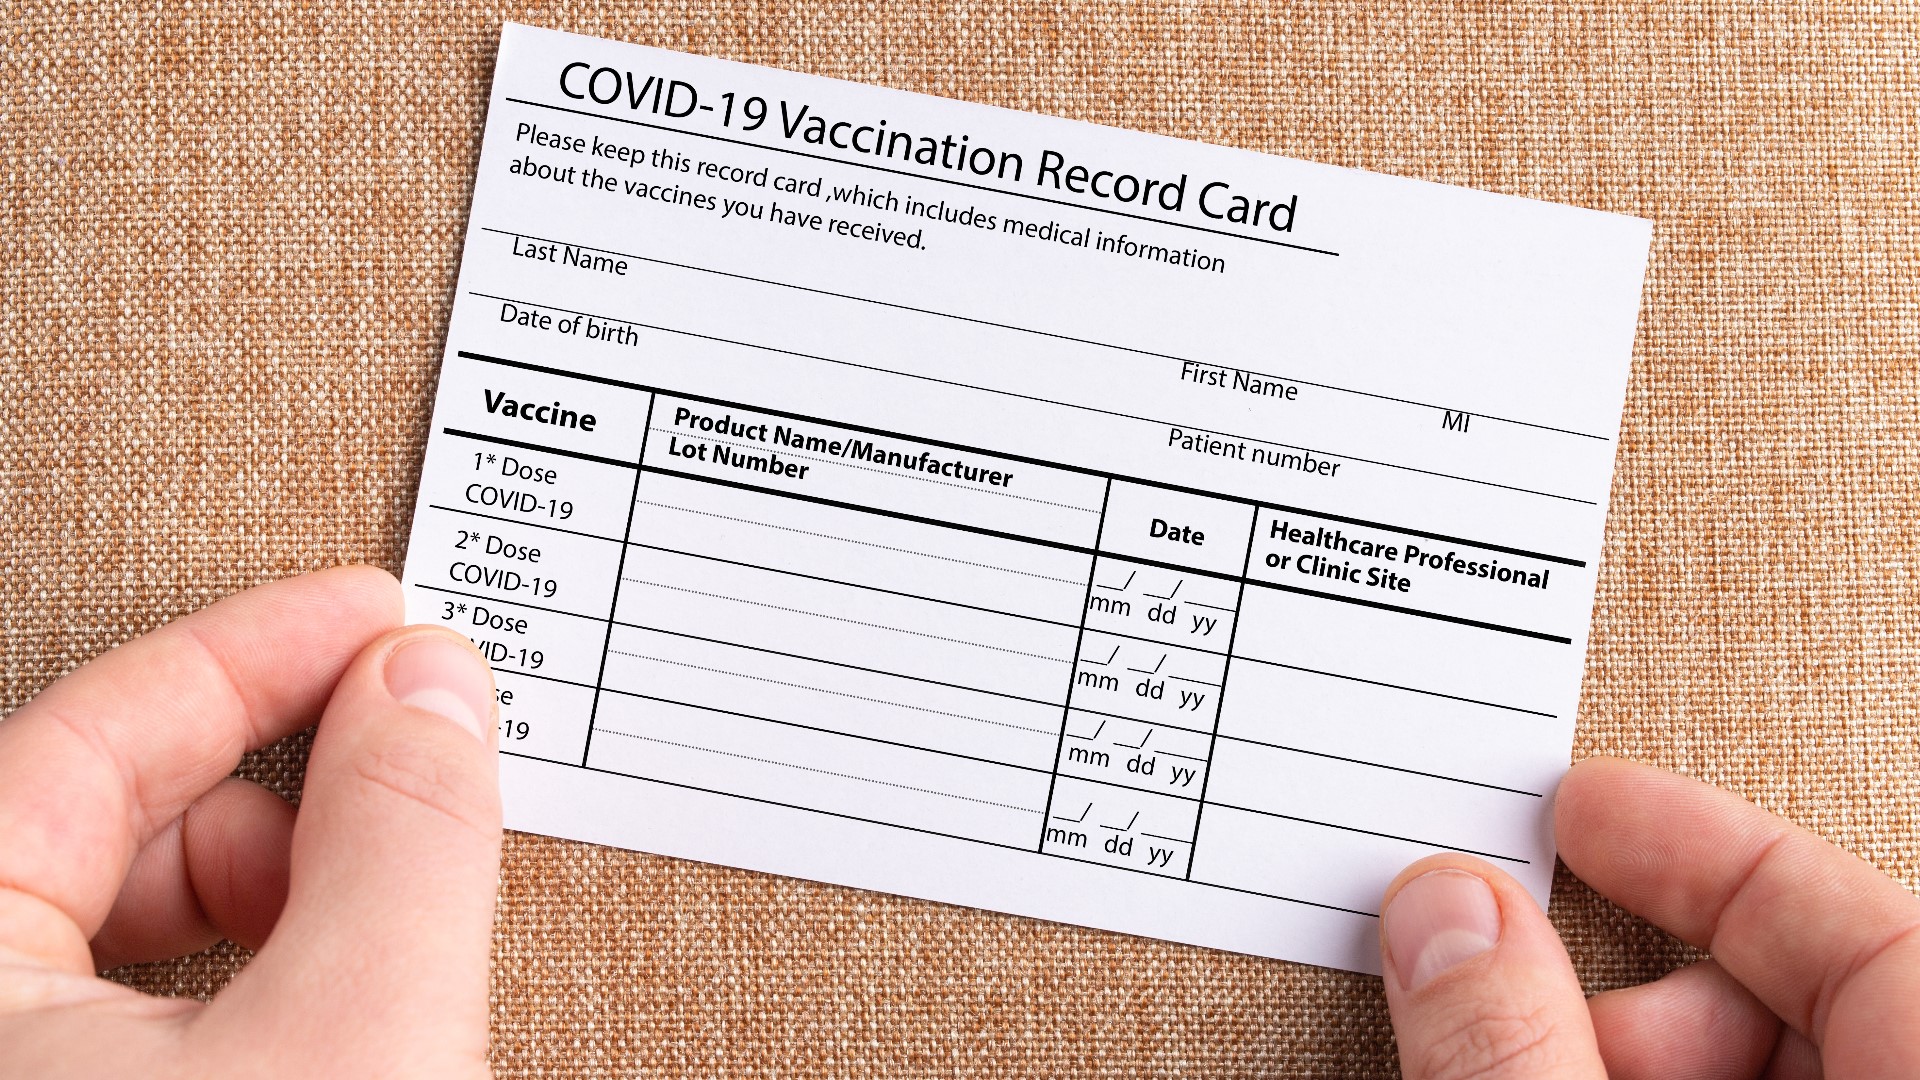 Violating COVID-19 mandates, including falsifying a vaccination card, is a misdemeanor that can result in a fine of up to $5,000, and up to a year in prison.